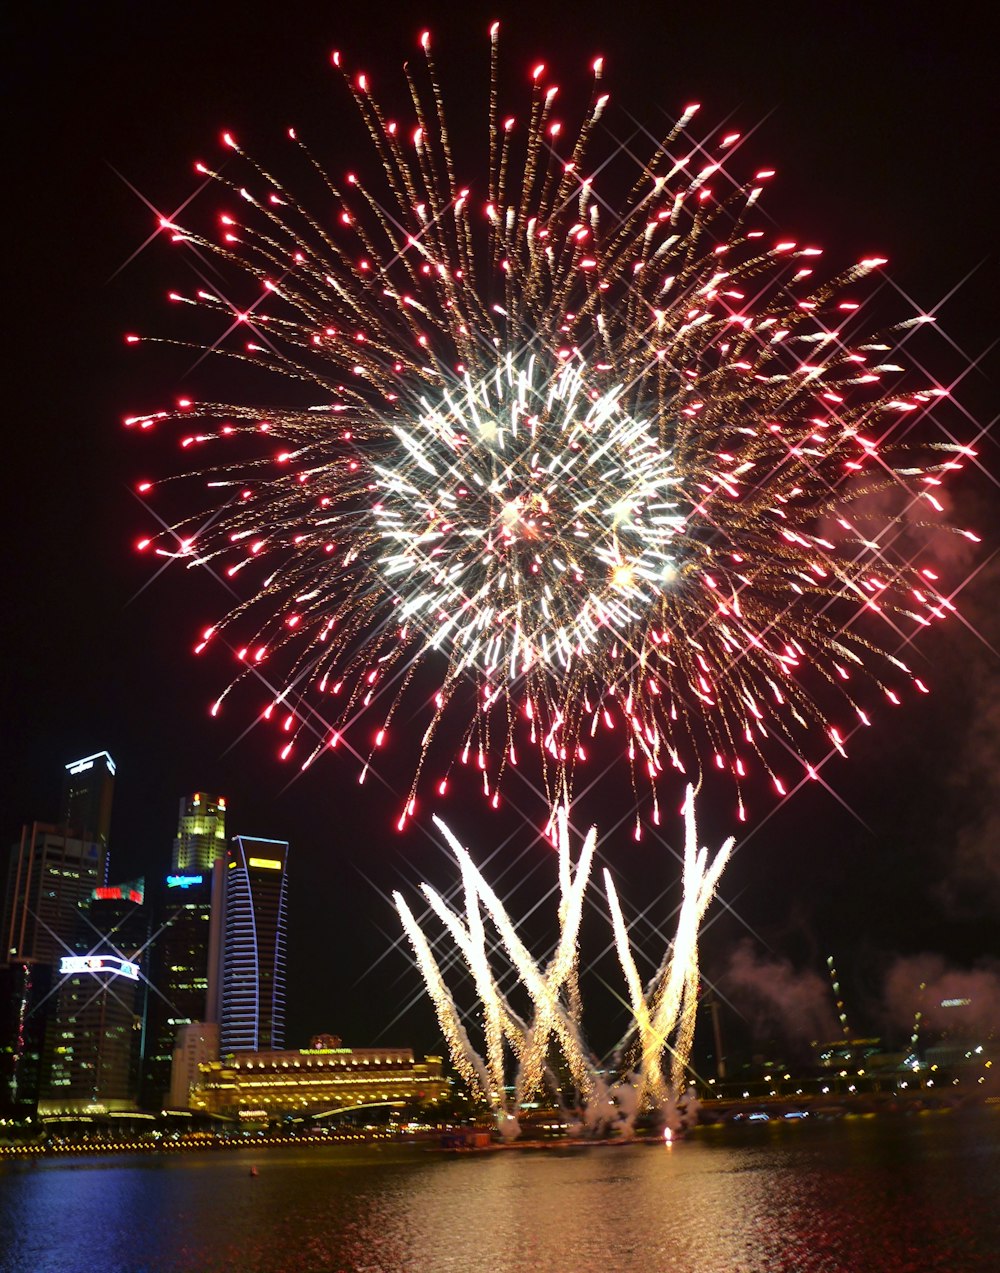 red and white fireworks display near buildings